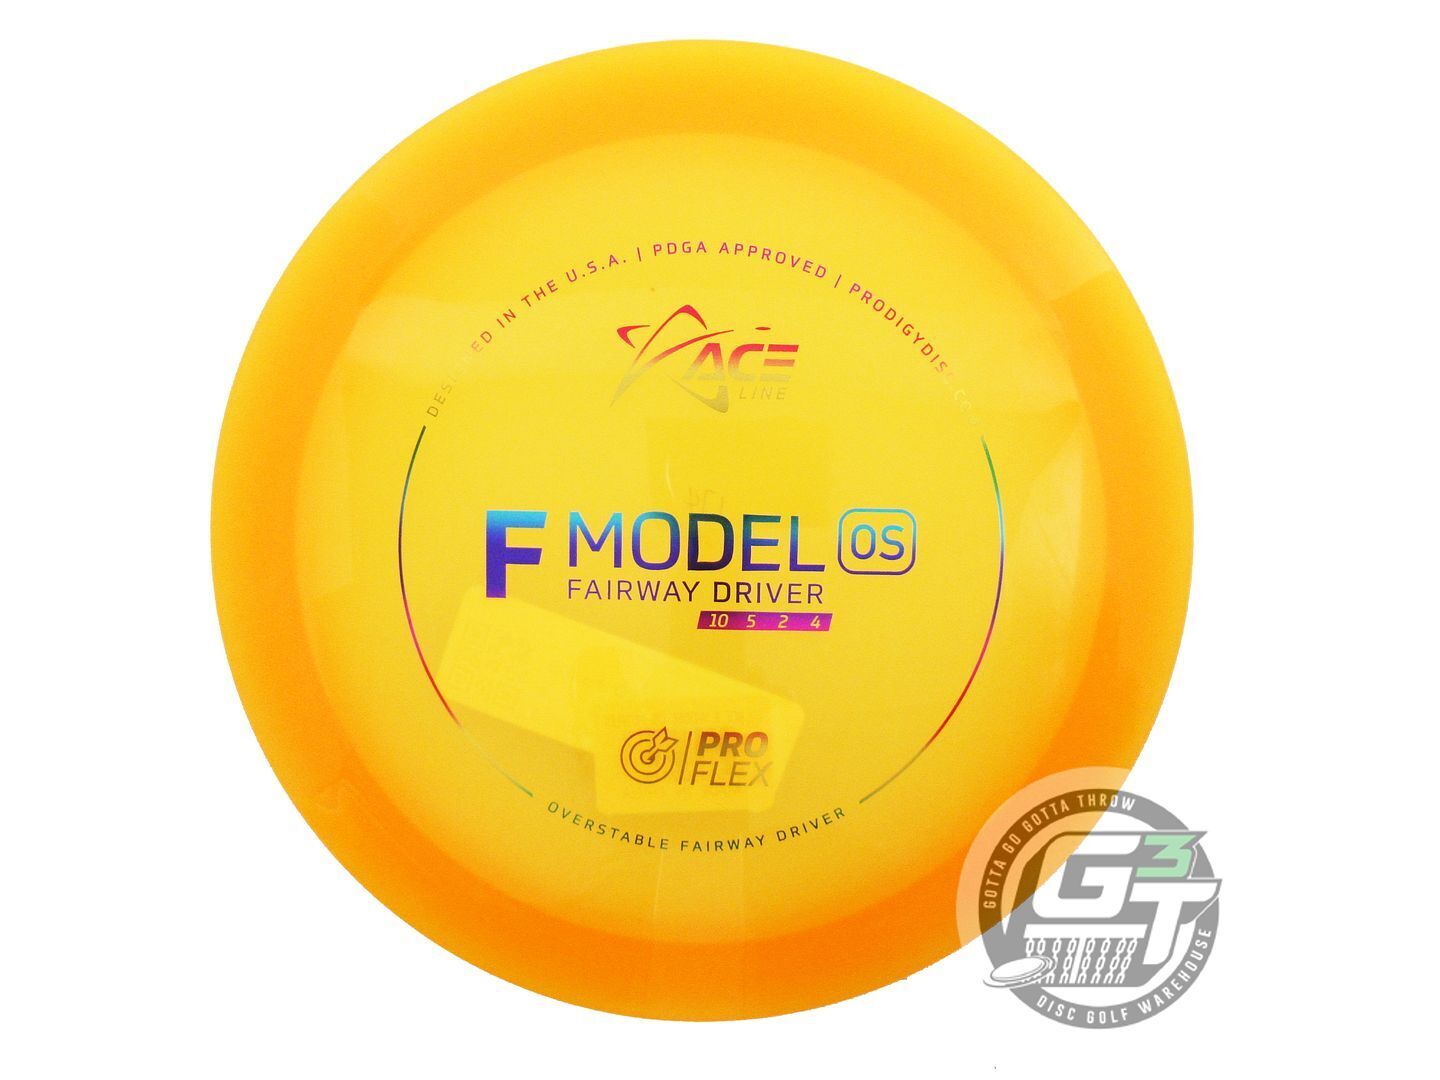 Prodigy Ace Line ProFlex F Model OS Fairway Driver Golf Disc (Individually Listed)